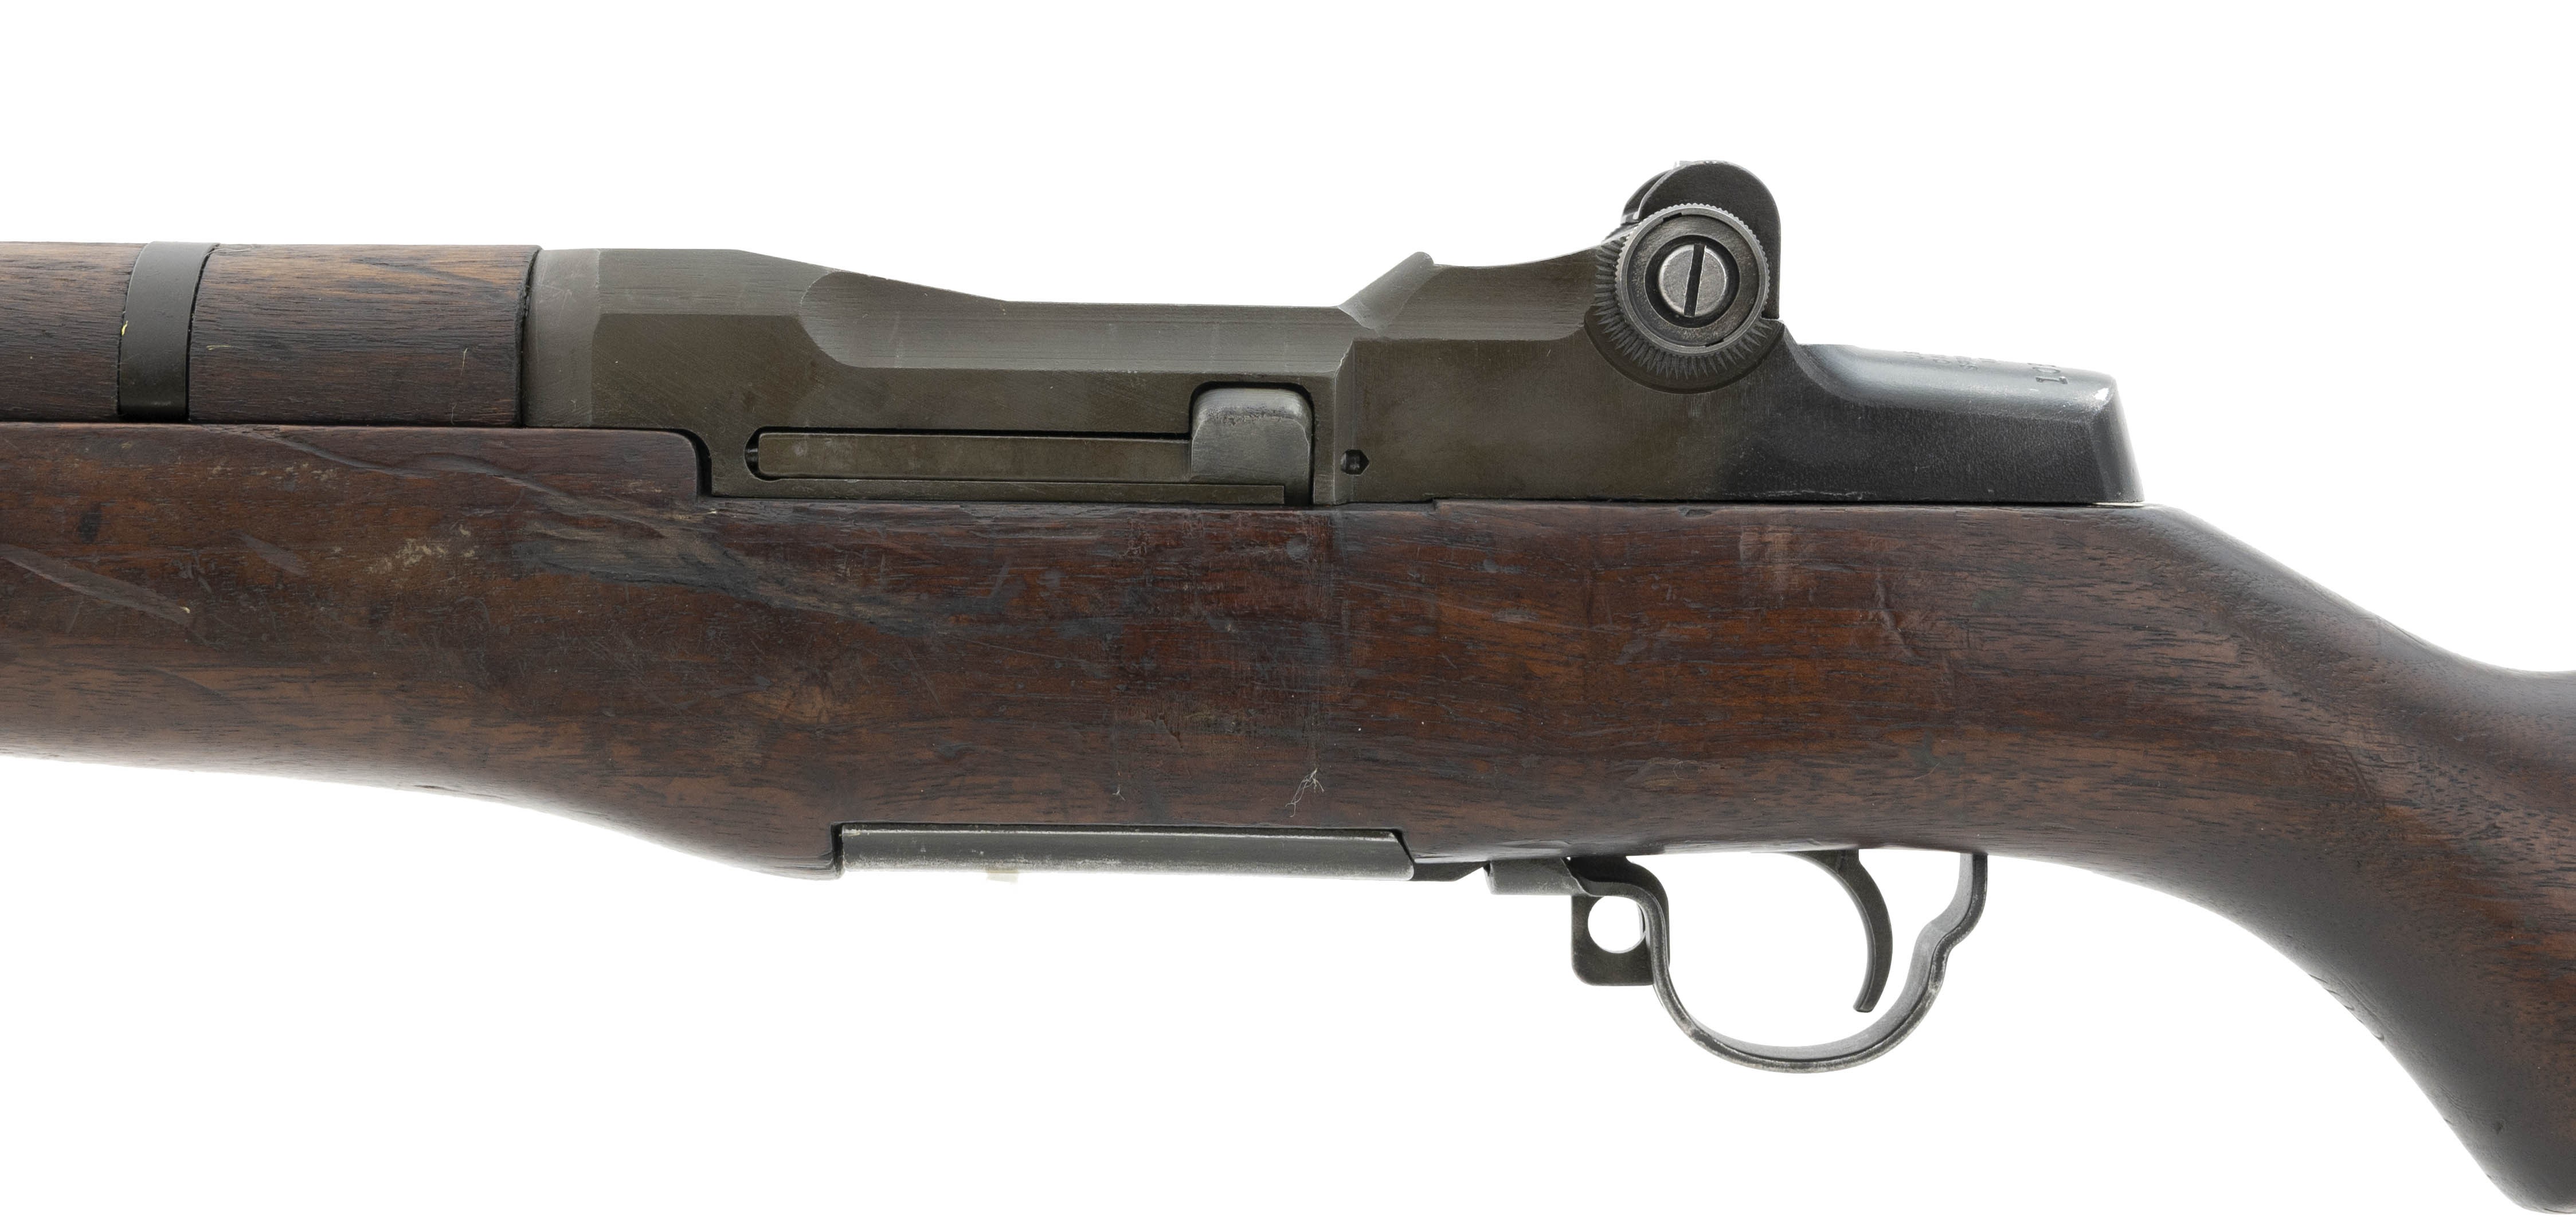 track m1 garand by serial number